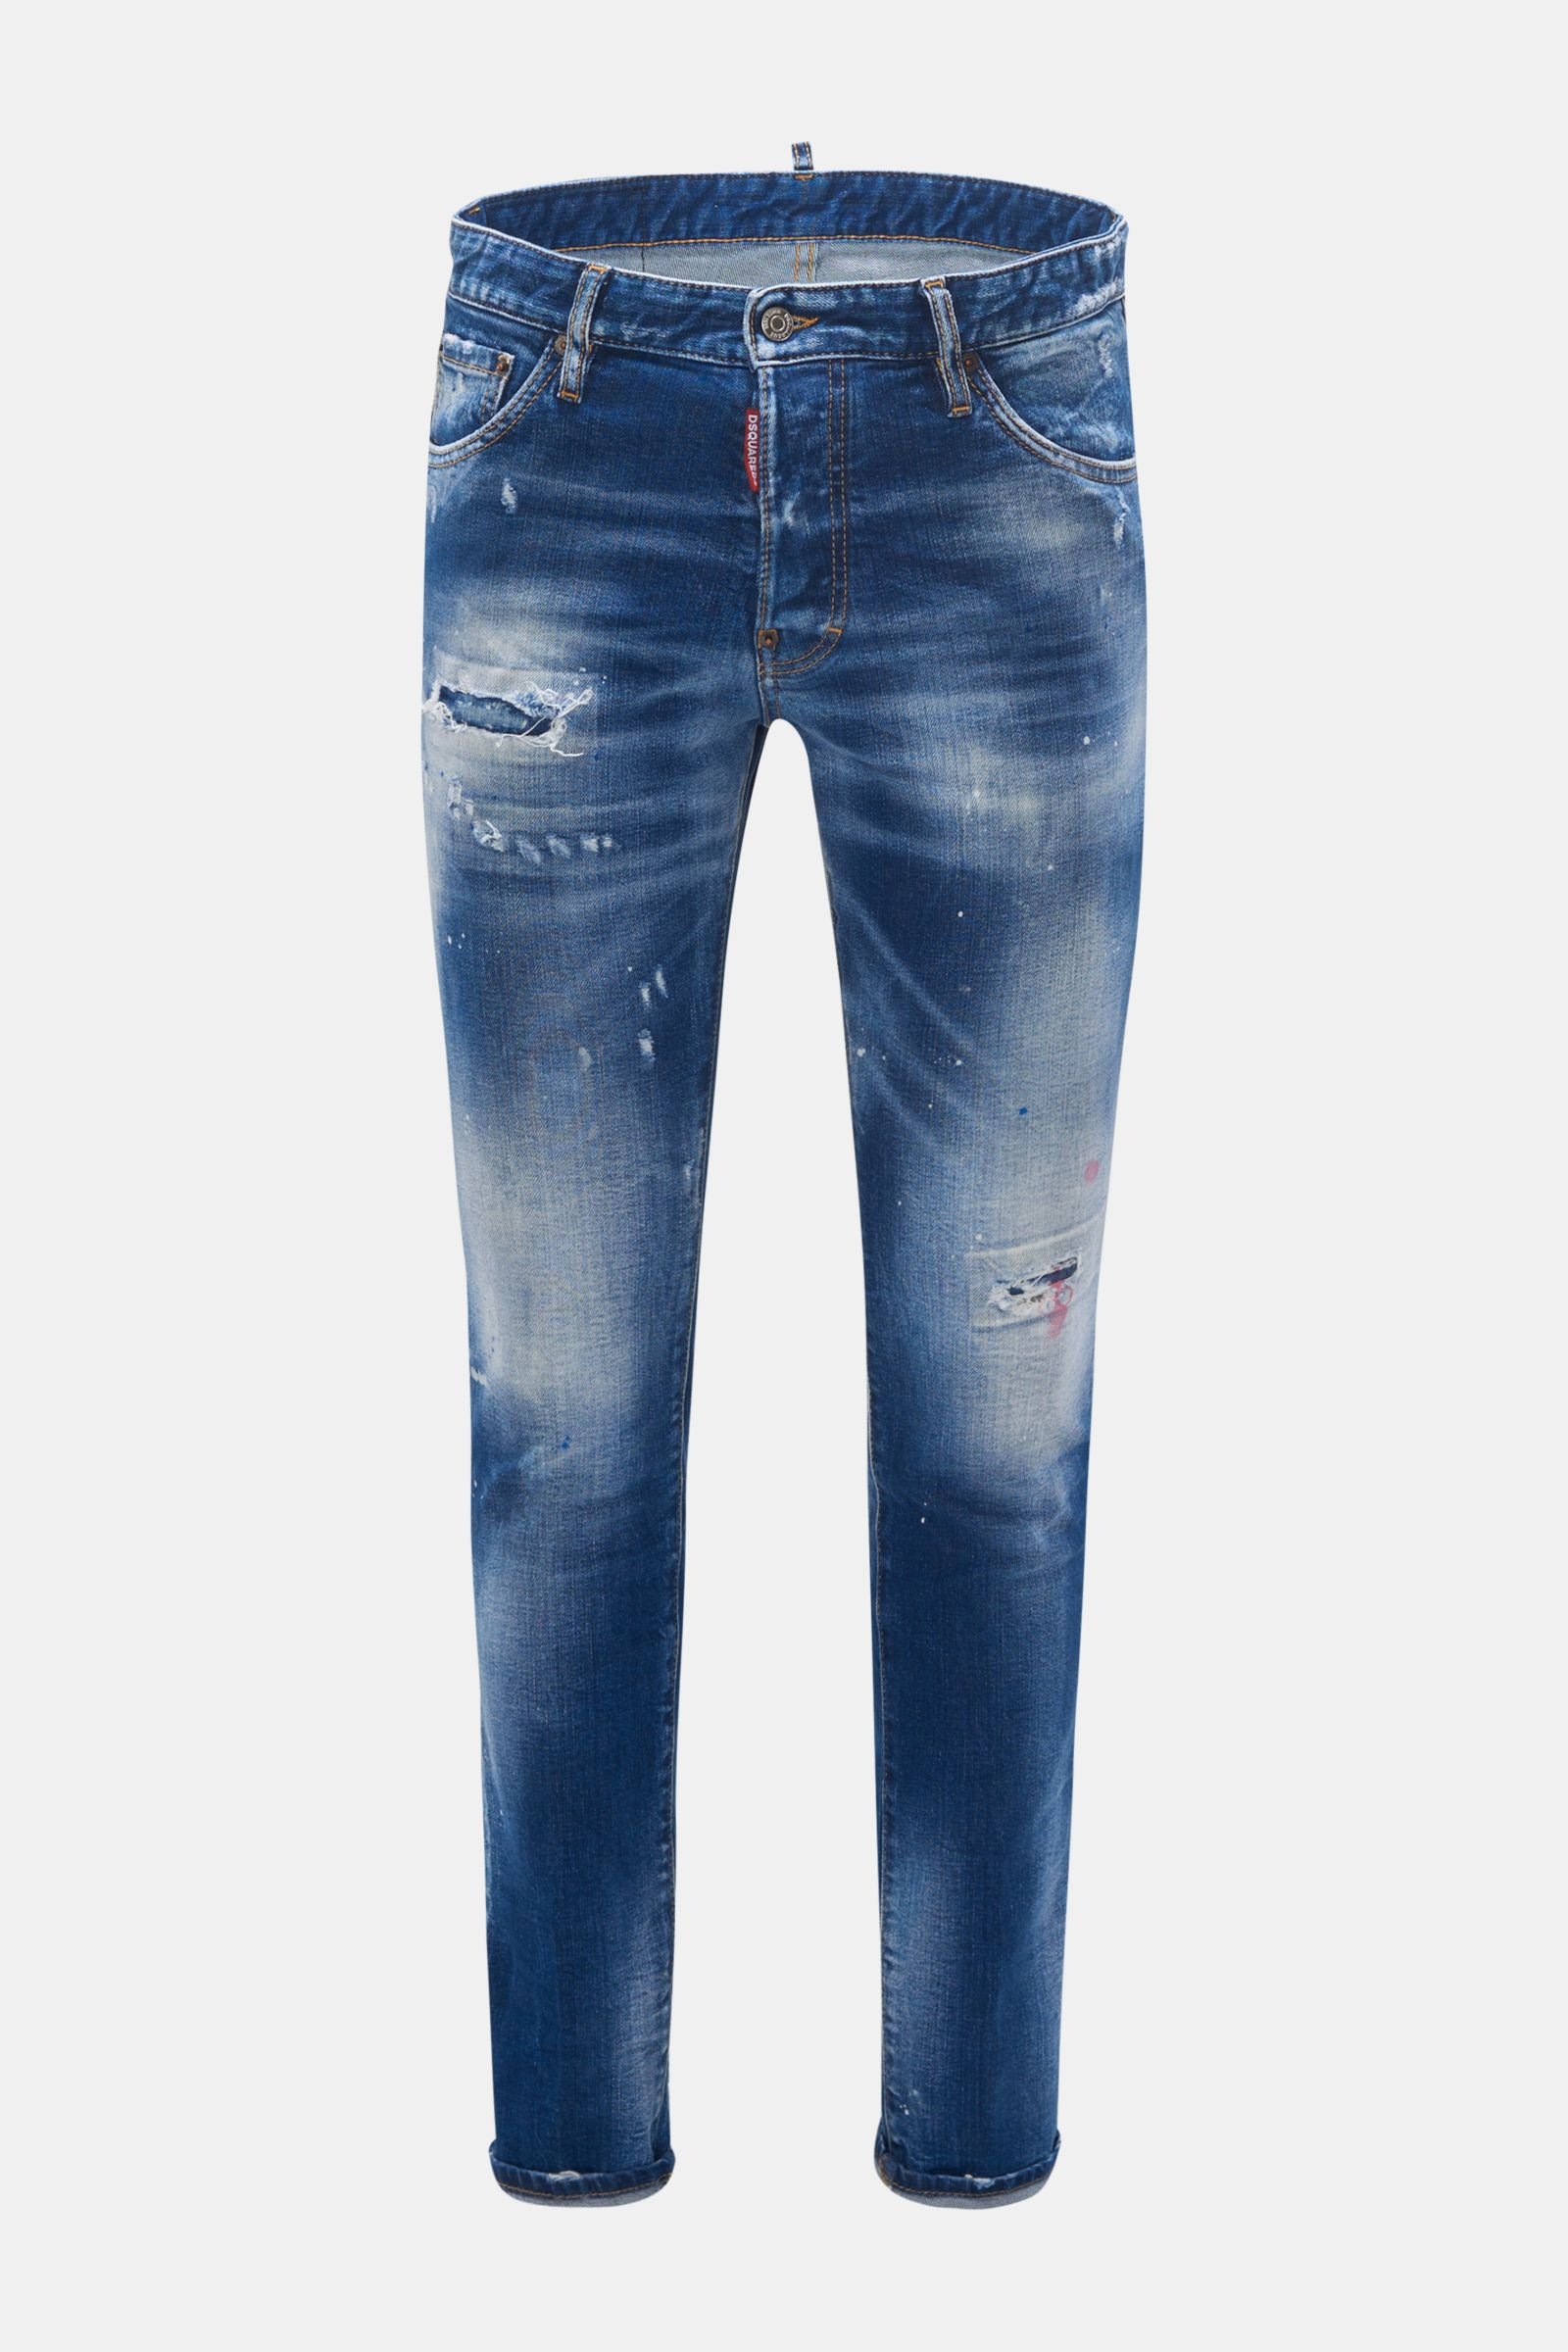 Jeans 'Cool Guy Jeans' grey-blue